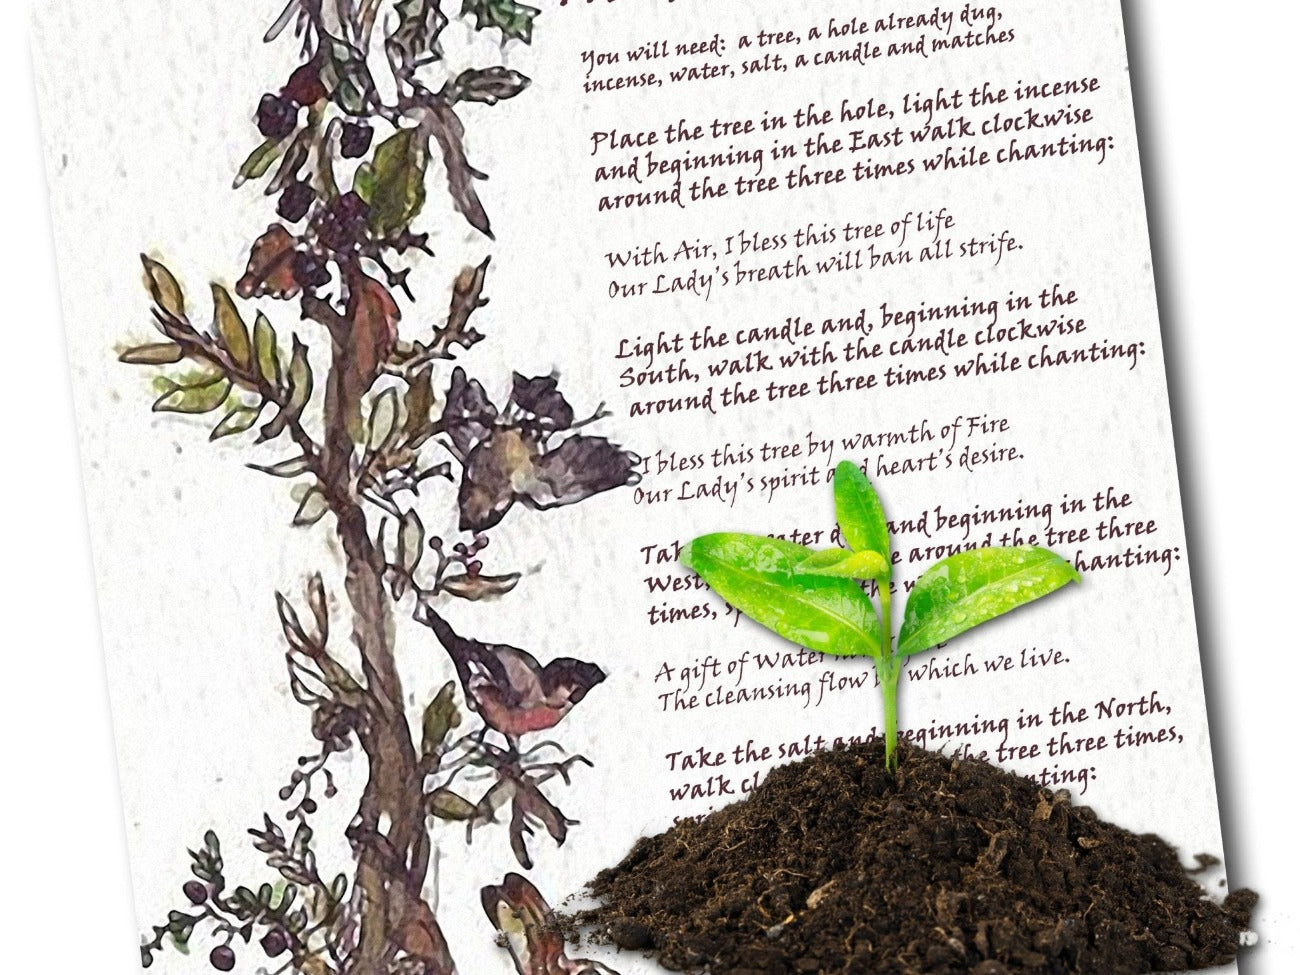 TREE PLANTING RITUAL, Green Witch, Plant Blessing Spell, Earth Day, Planting Magick Ritual, Wicca Tree Ritual, Herbal Witchcraft, Printable - Morgana Magick Spell